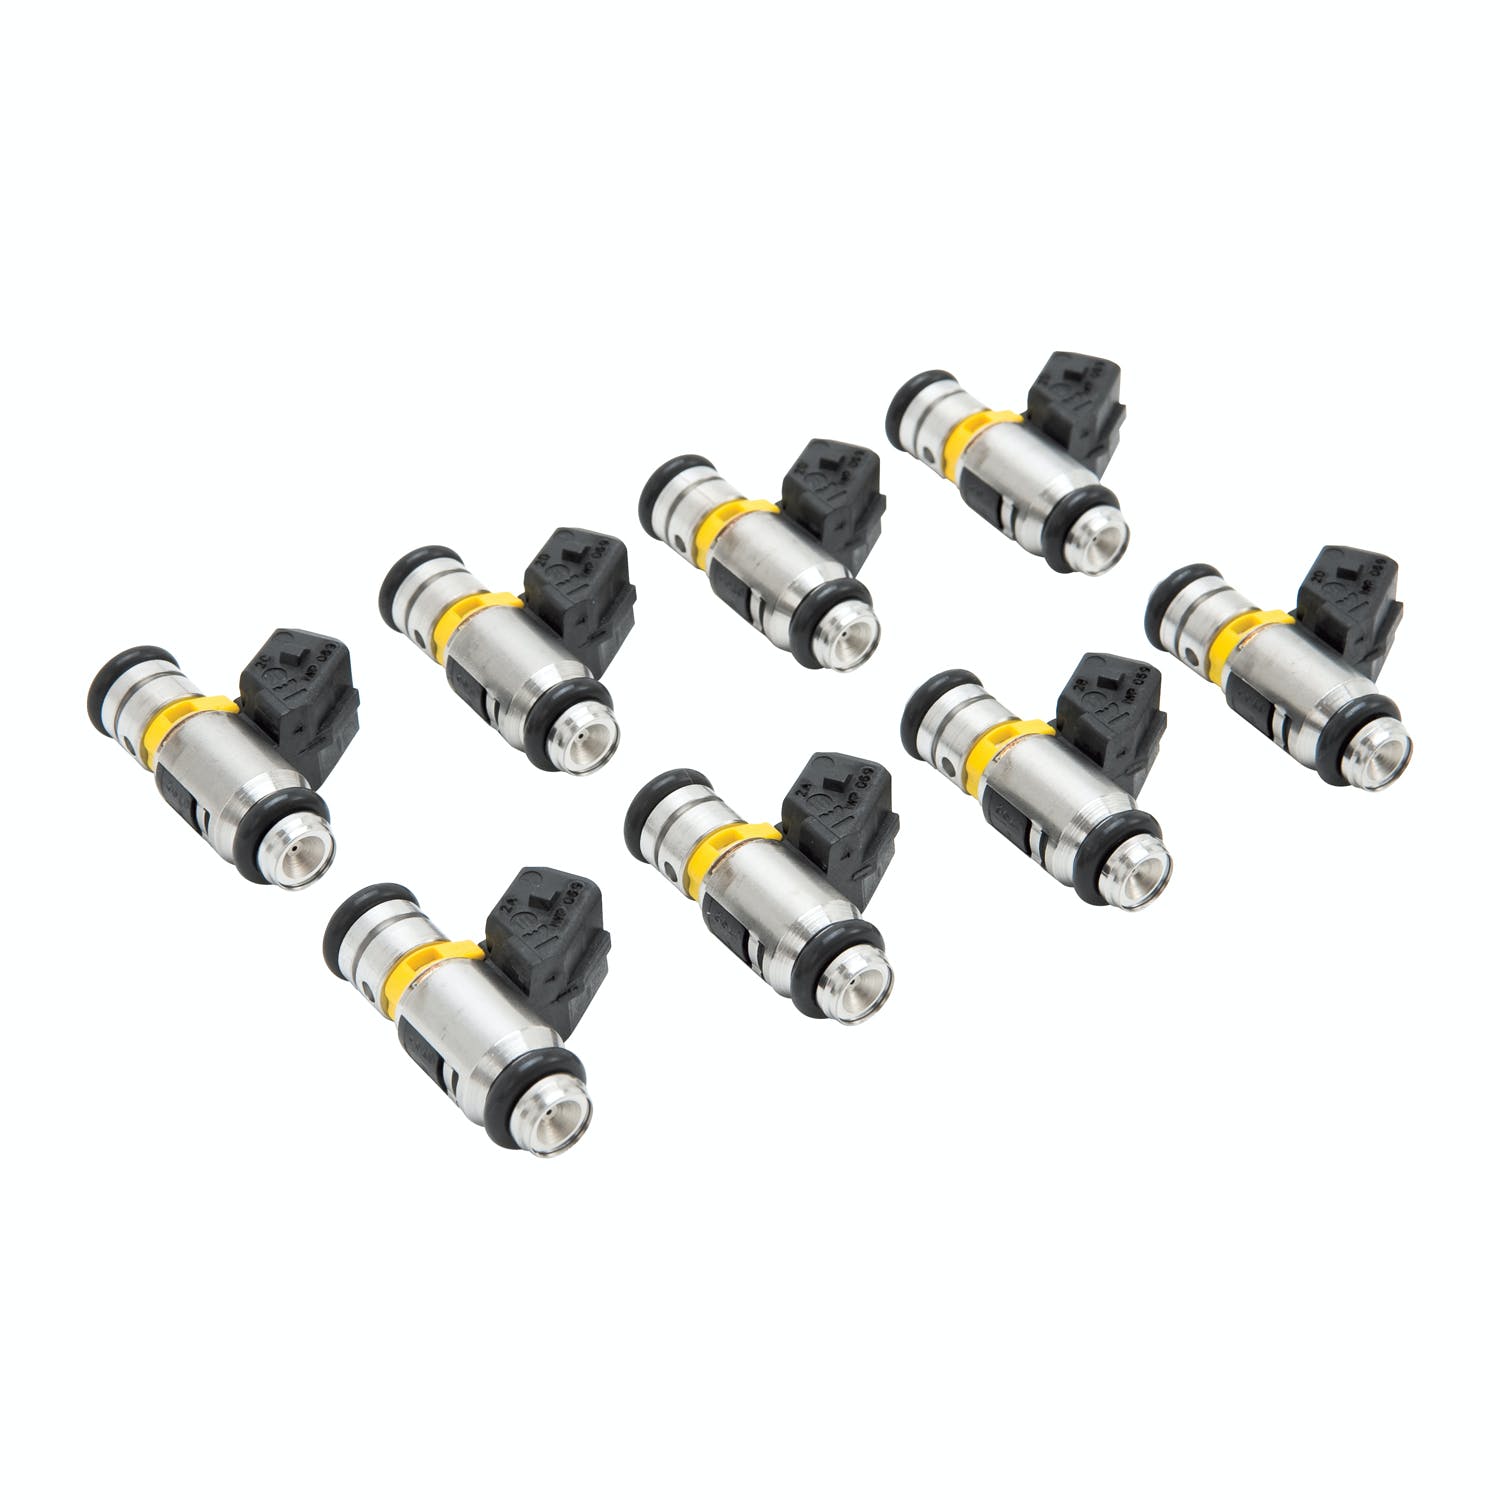 Edelbrock 3684 REPLACEMENT FUEL INJECTOR SET (8) FOR 3550